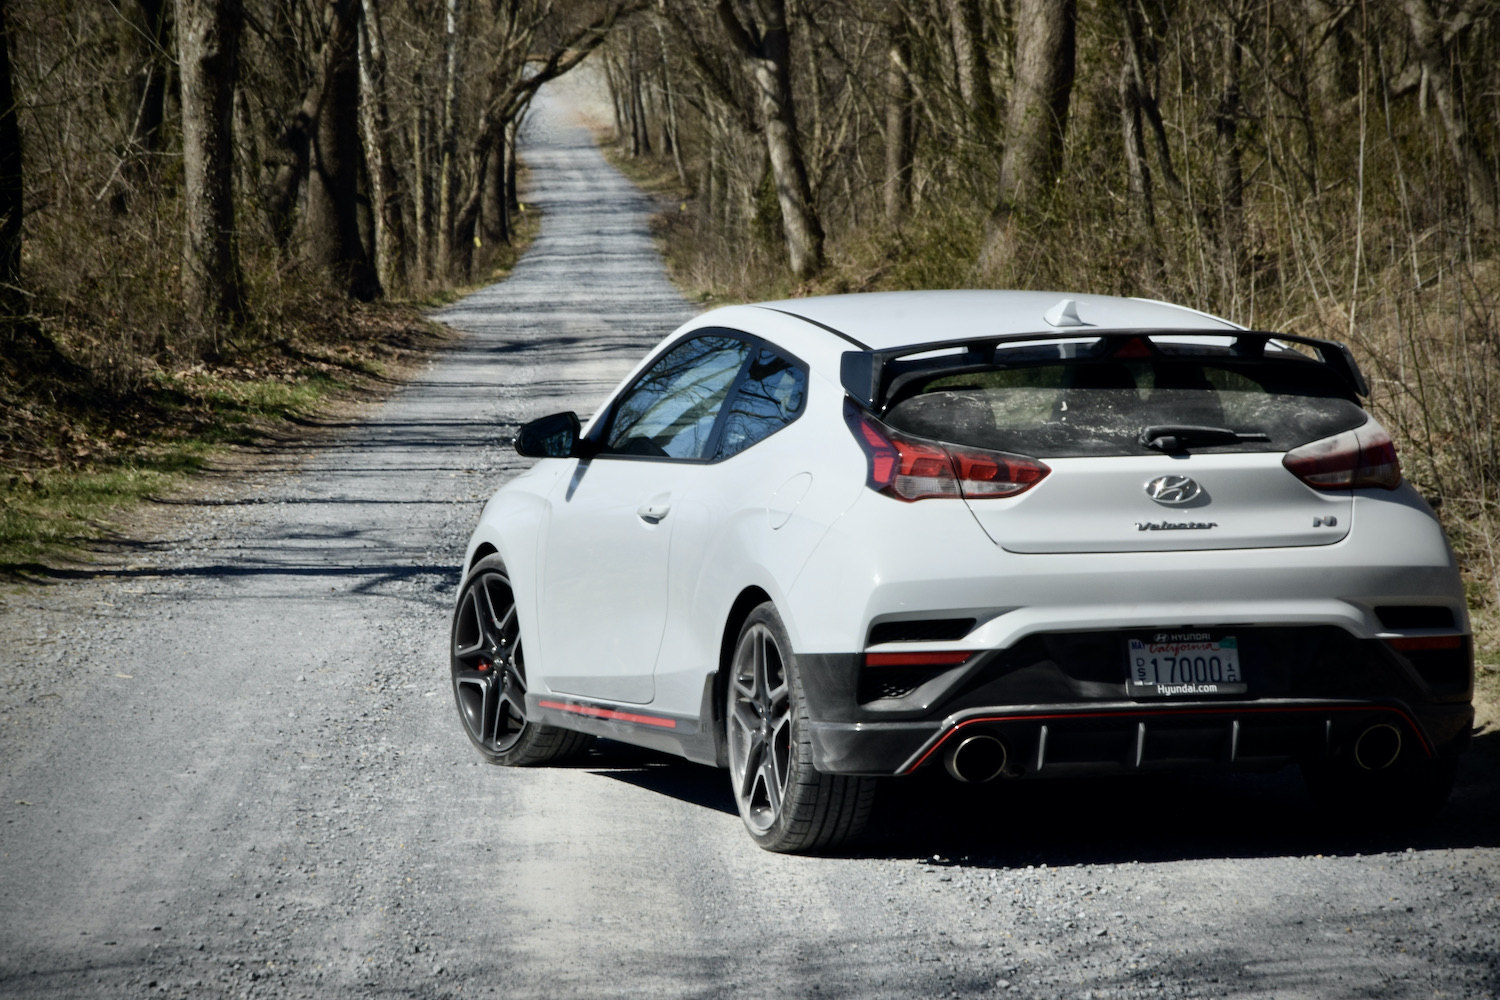 Hyundai Veloster N rear end from driver's side on a dirt path.